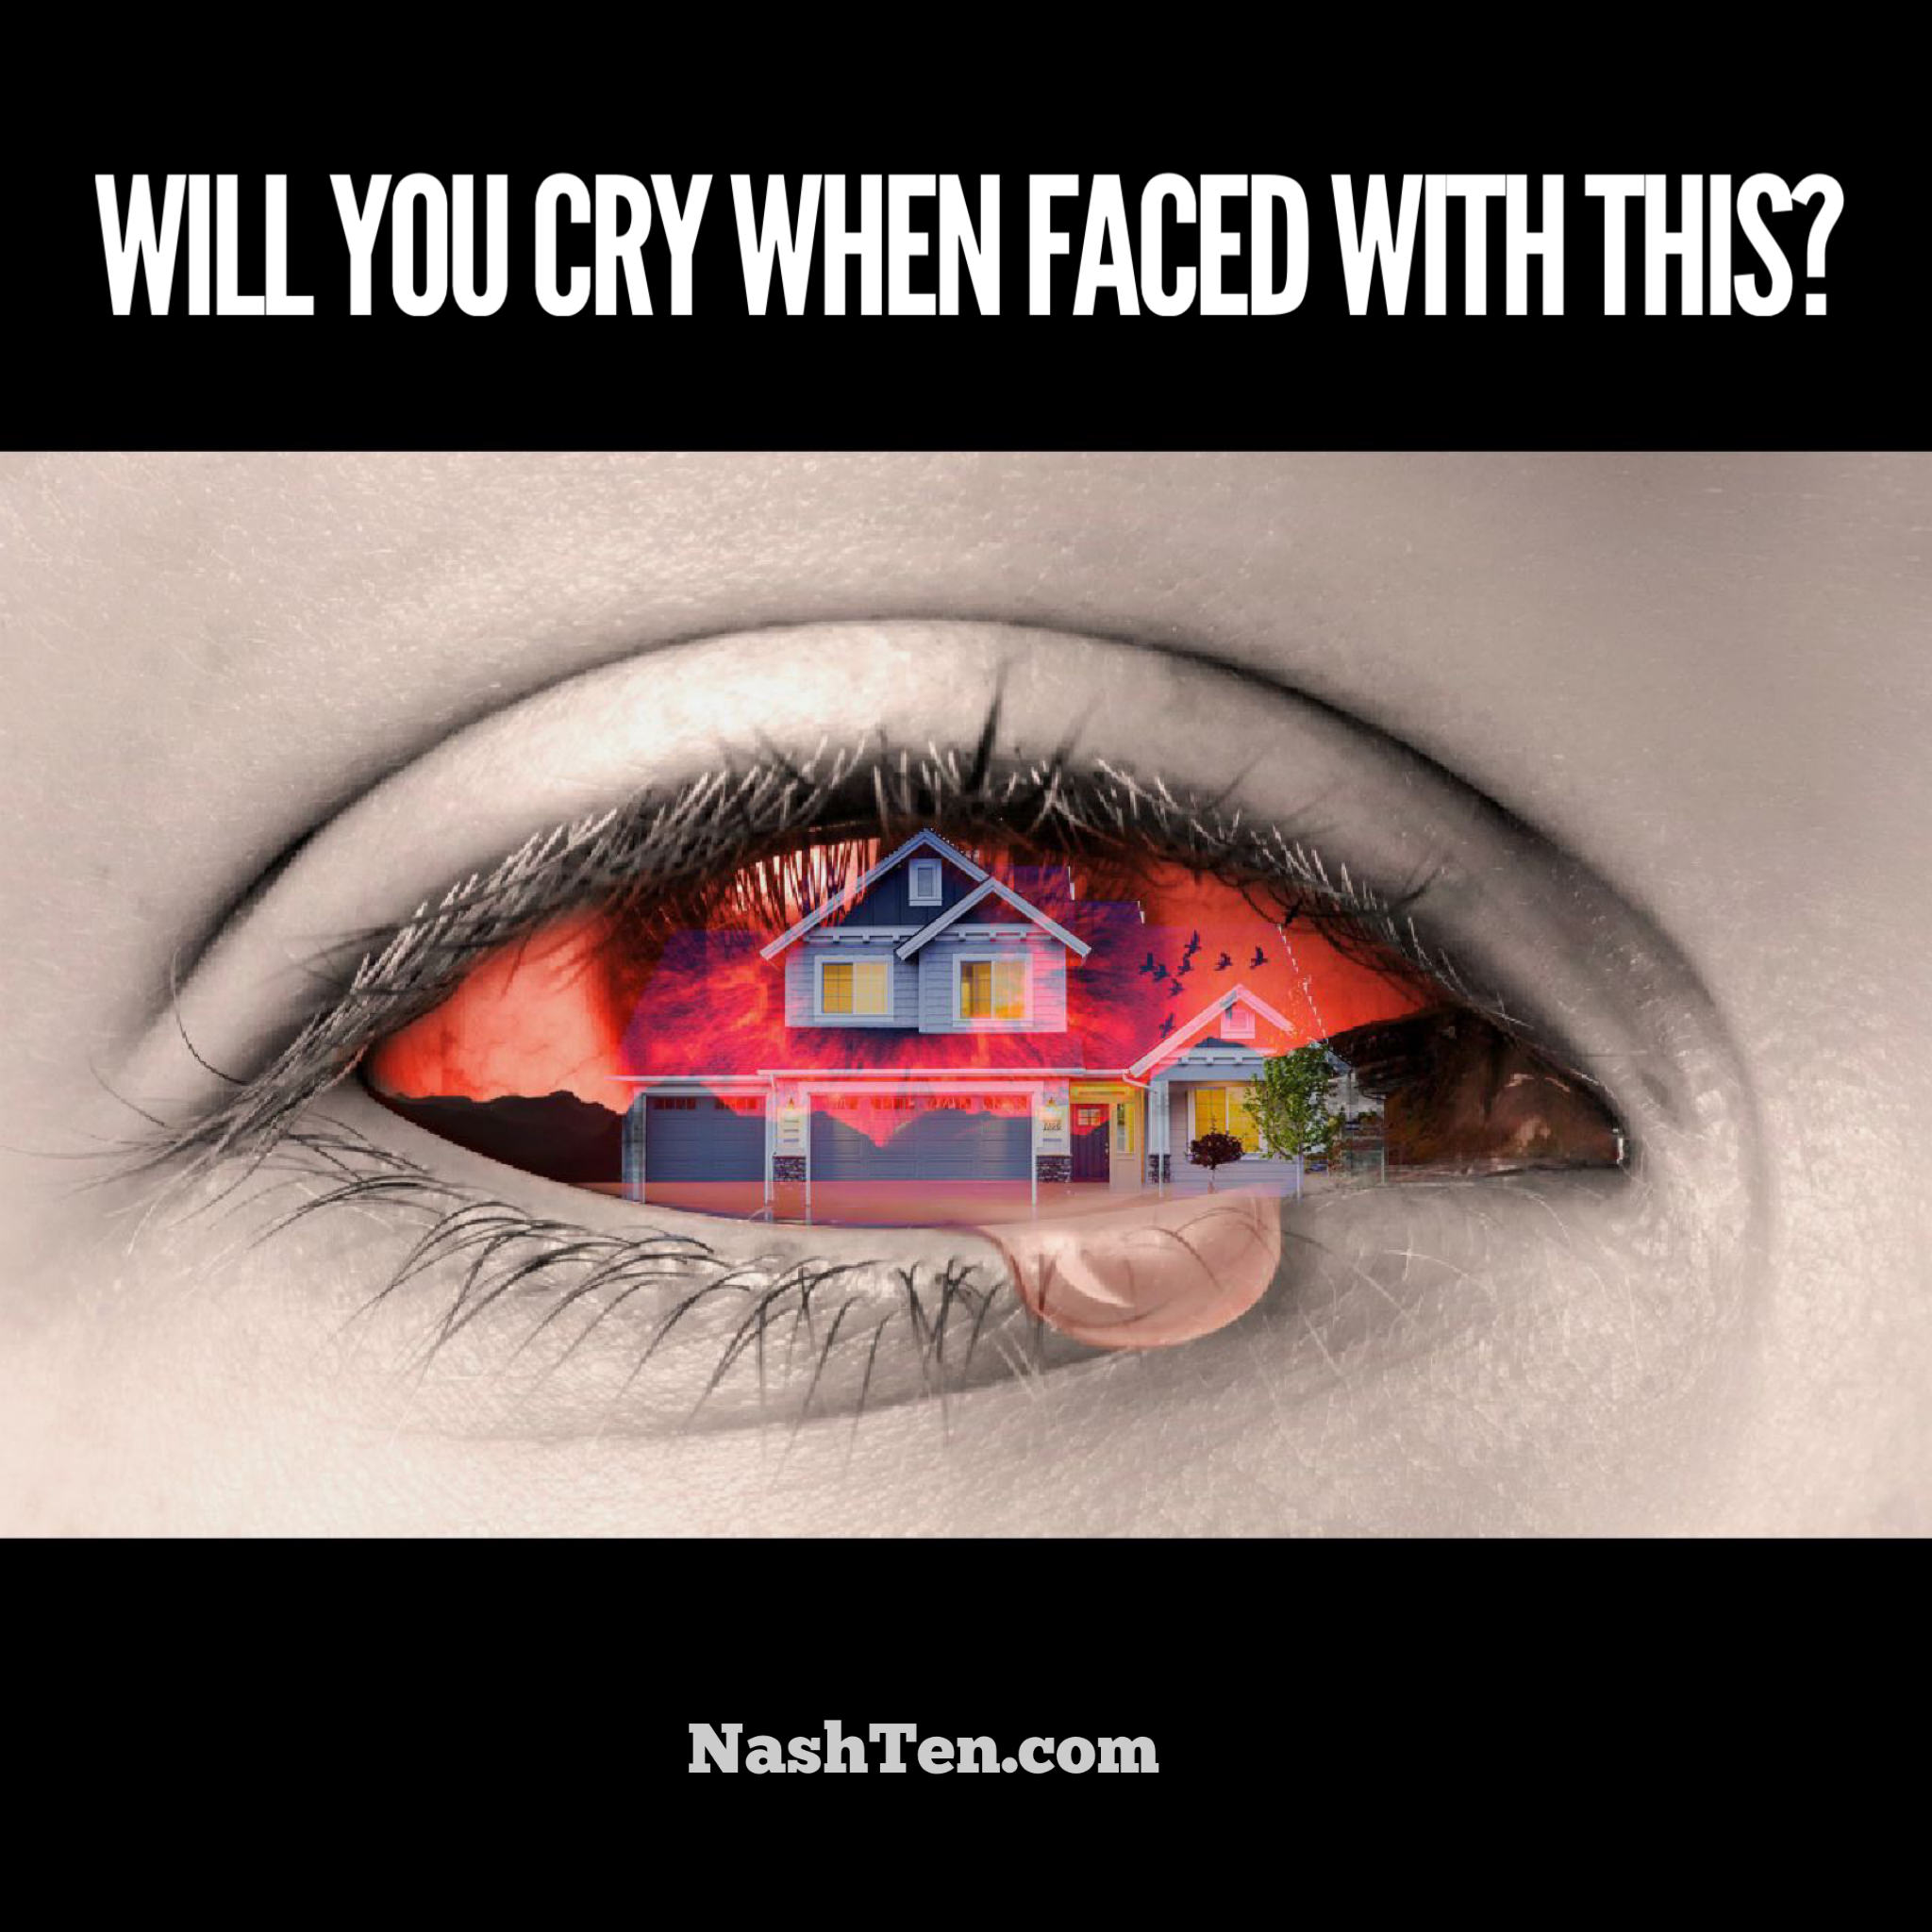 Will you cry when faced with this?